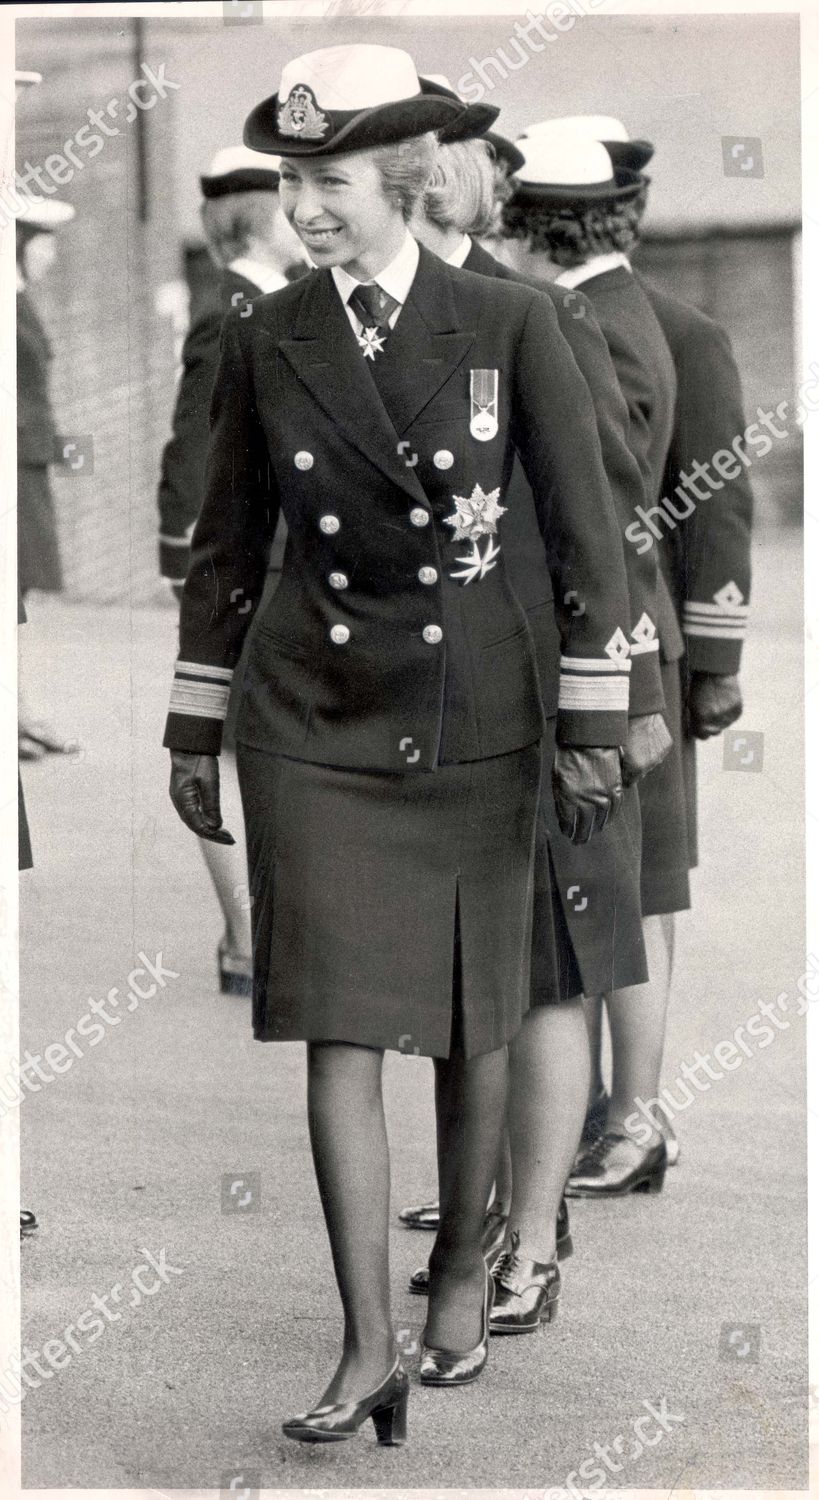 princess-anne-now-princess-royal-uniforms-picture-shows-princess-anne-weare-the-uniform-of-a-wrns-office-for-the-first-time-yesterday-the-princess-appointed-chief-commandant-of-the-womens-royal-noval-service-in-july-took-the-salute-during-a-p-shutterstock-editorial-891149a.jpg